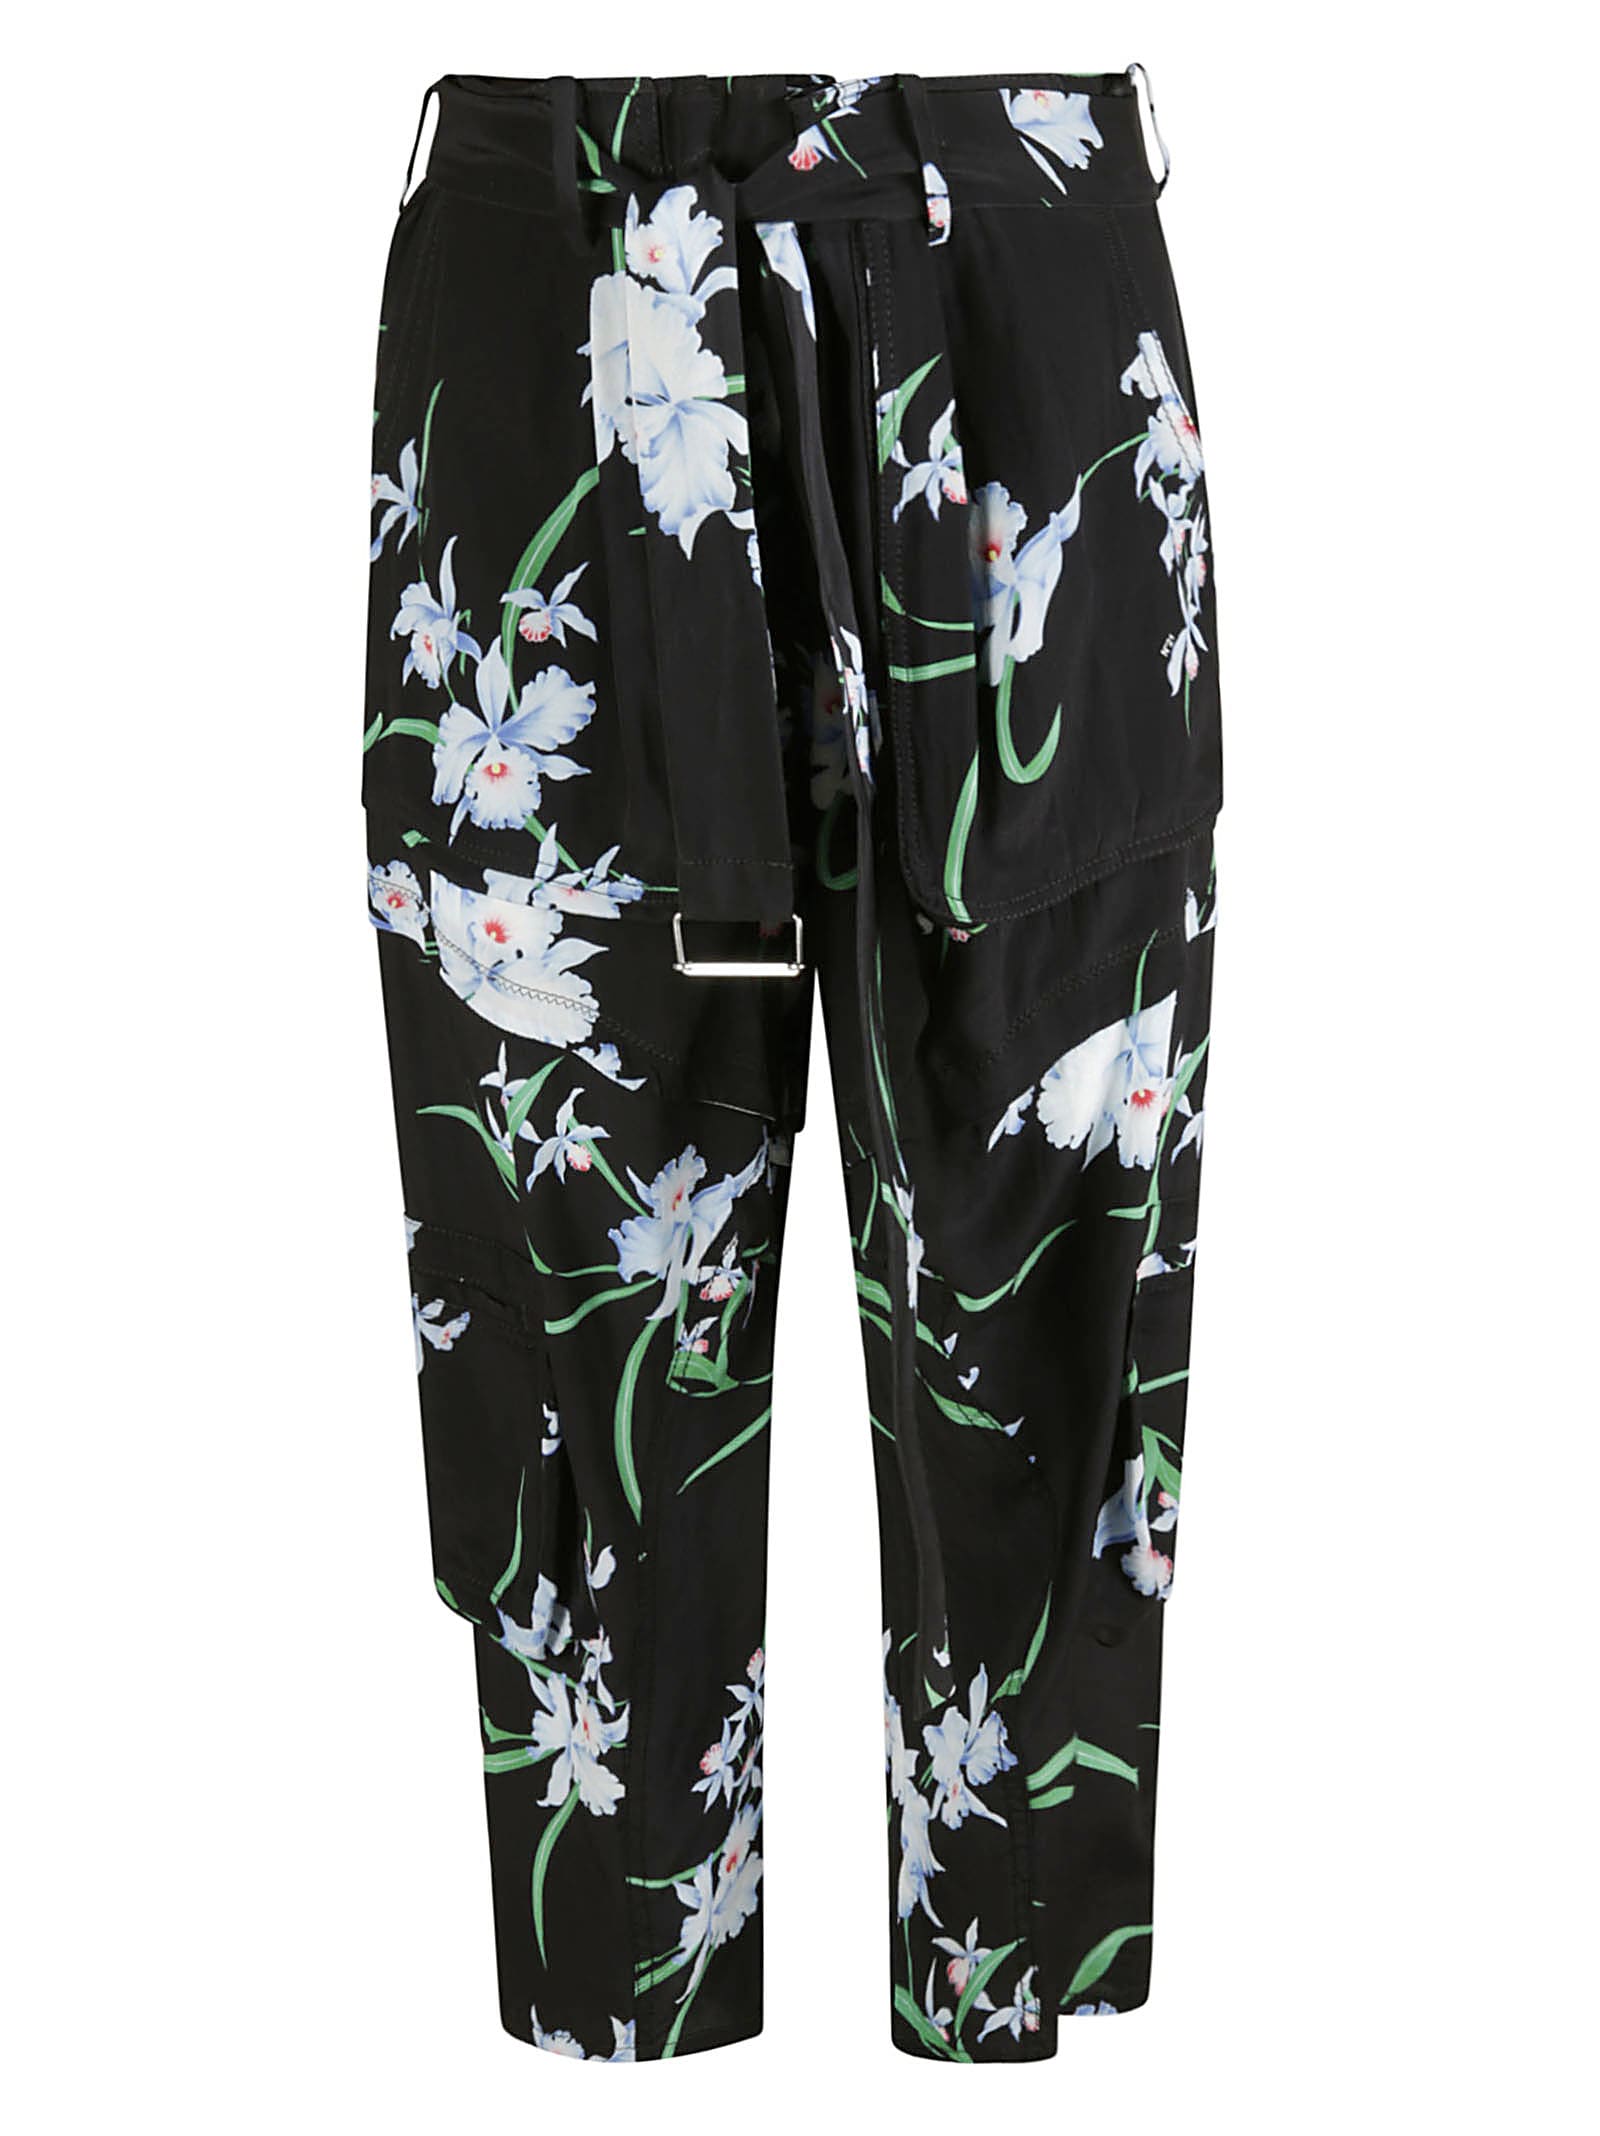 N.21 Floral Print Belted Trousers